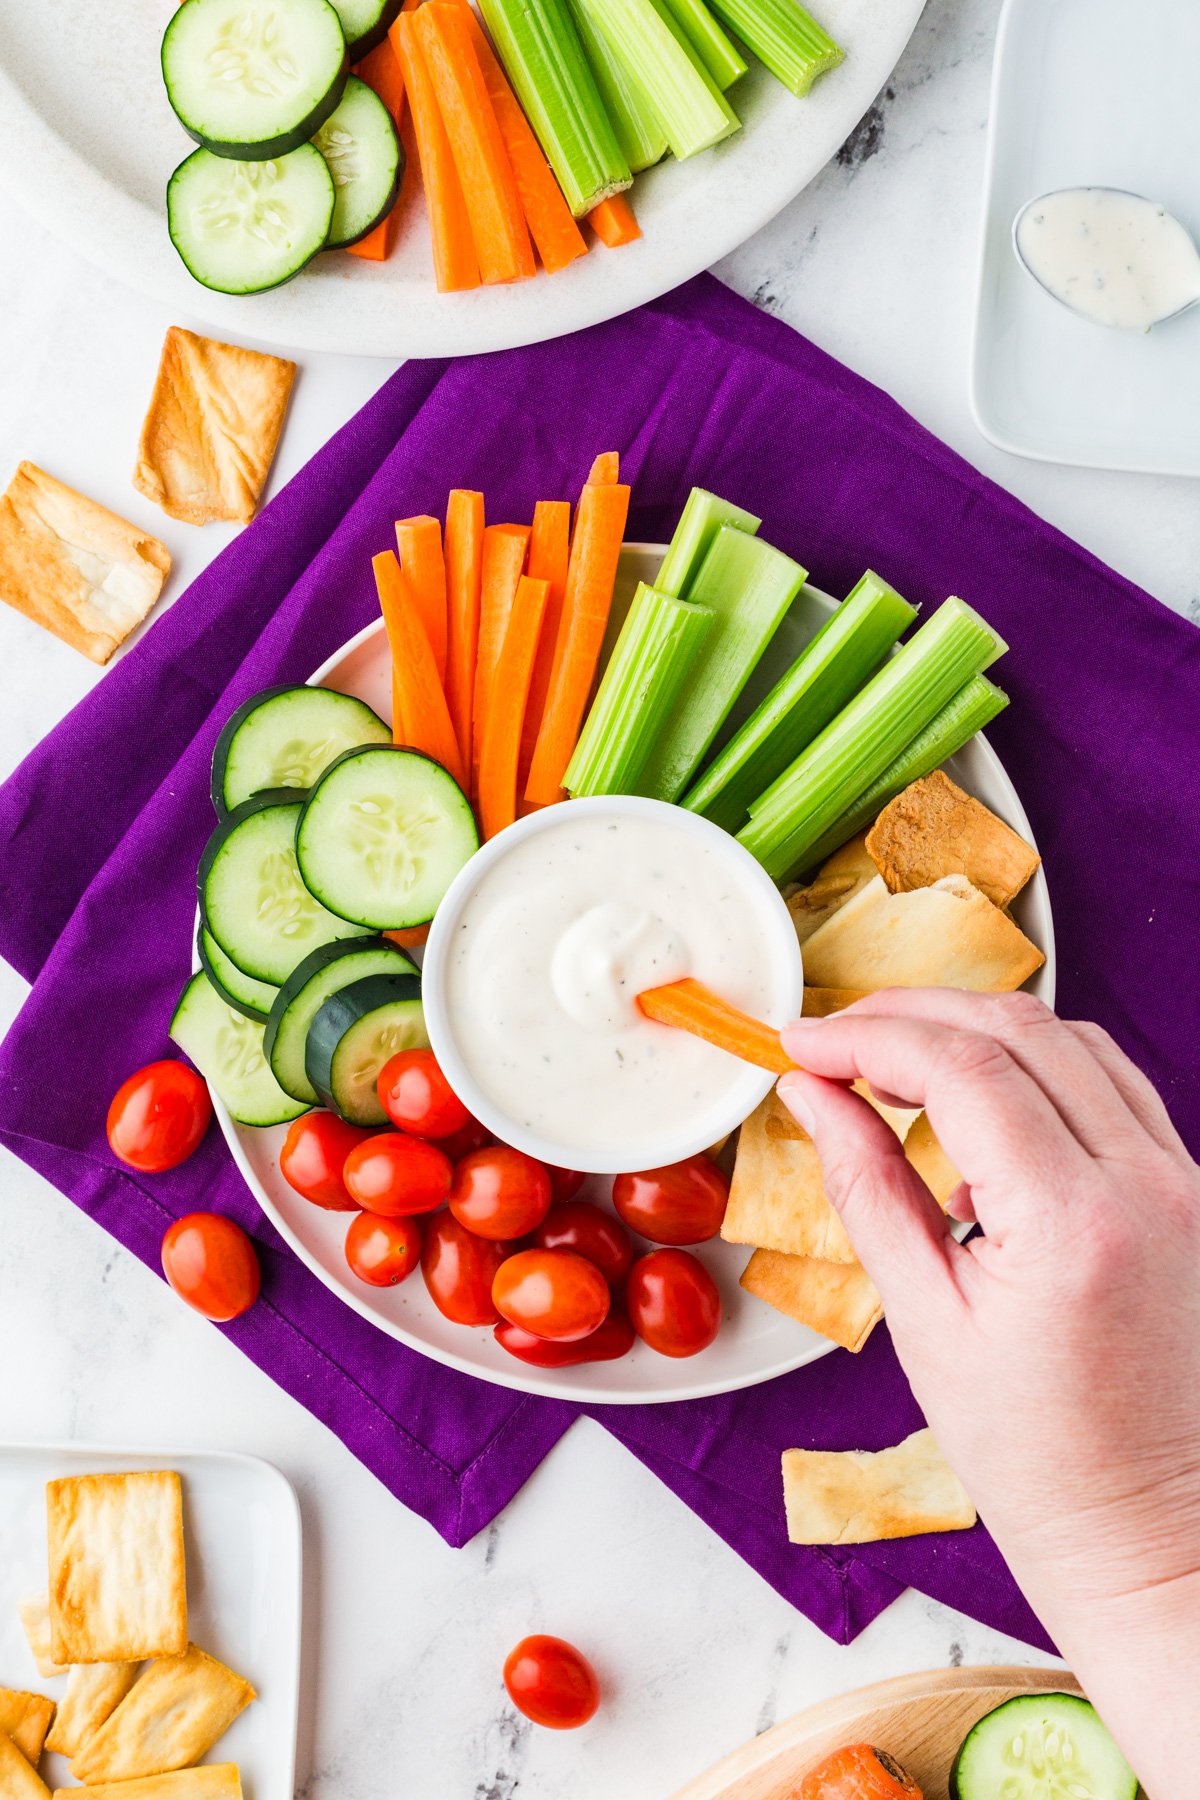 Top view of a hand dipping a carrot stick into ranch dressing, which is in the center of a veggie, cracker and dip spread.